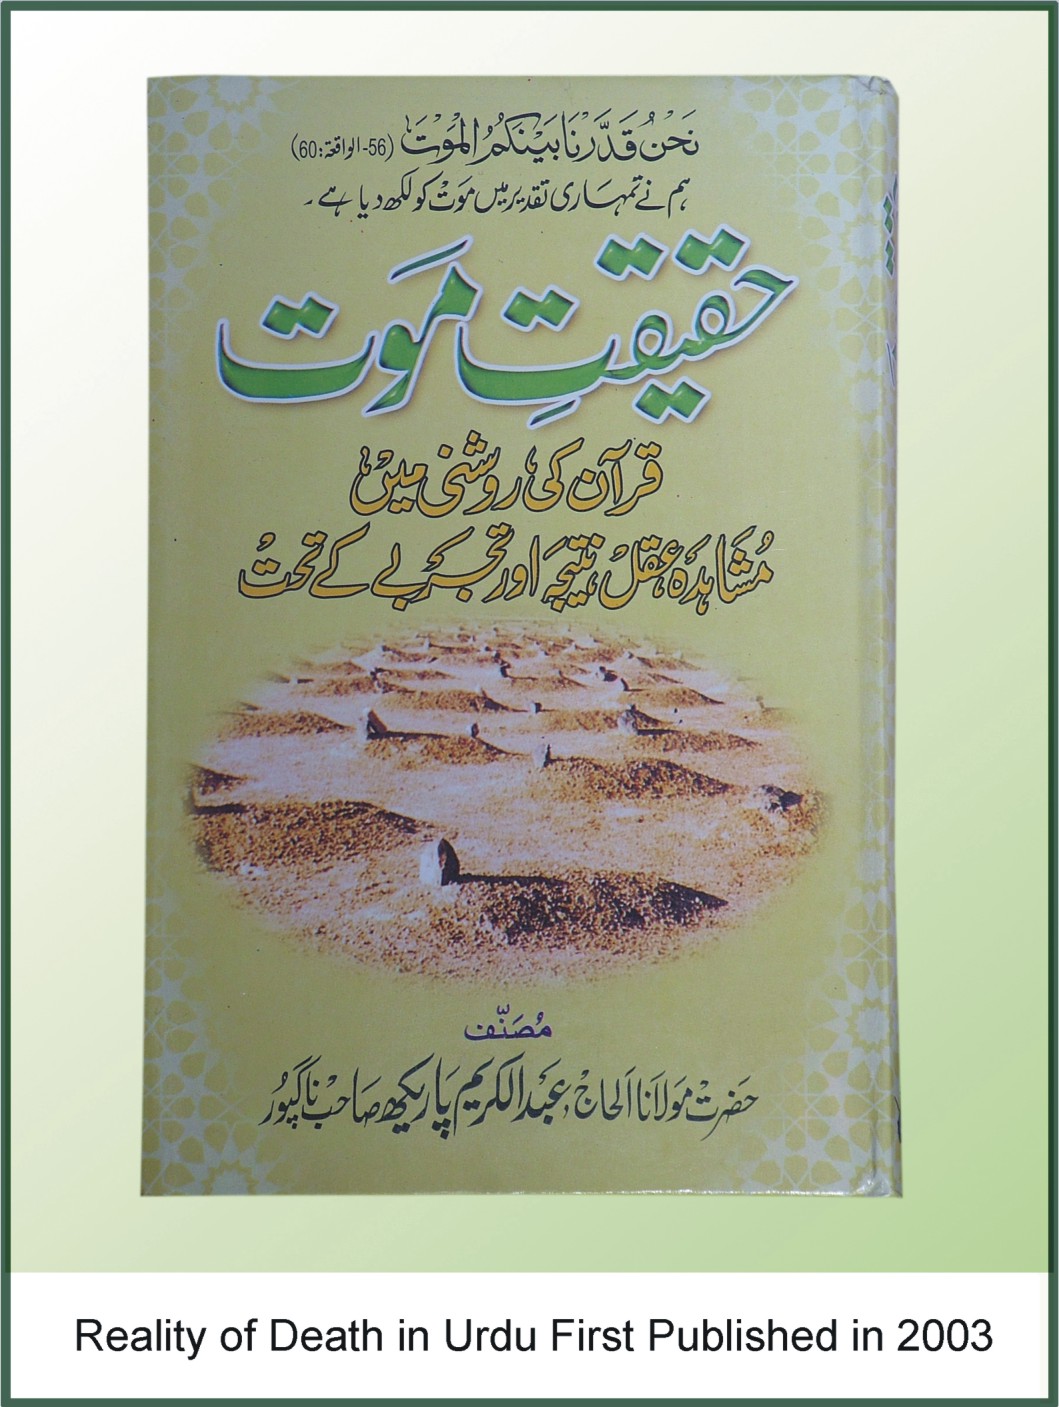 Reality of Death (Urdu) First Published in 2003